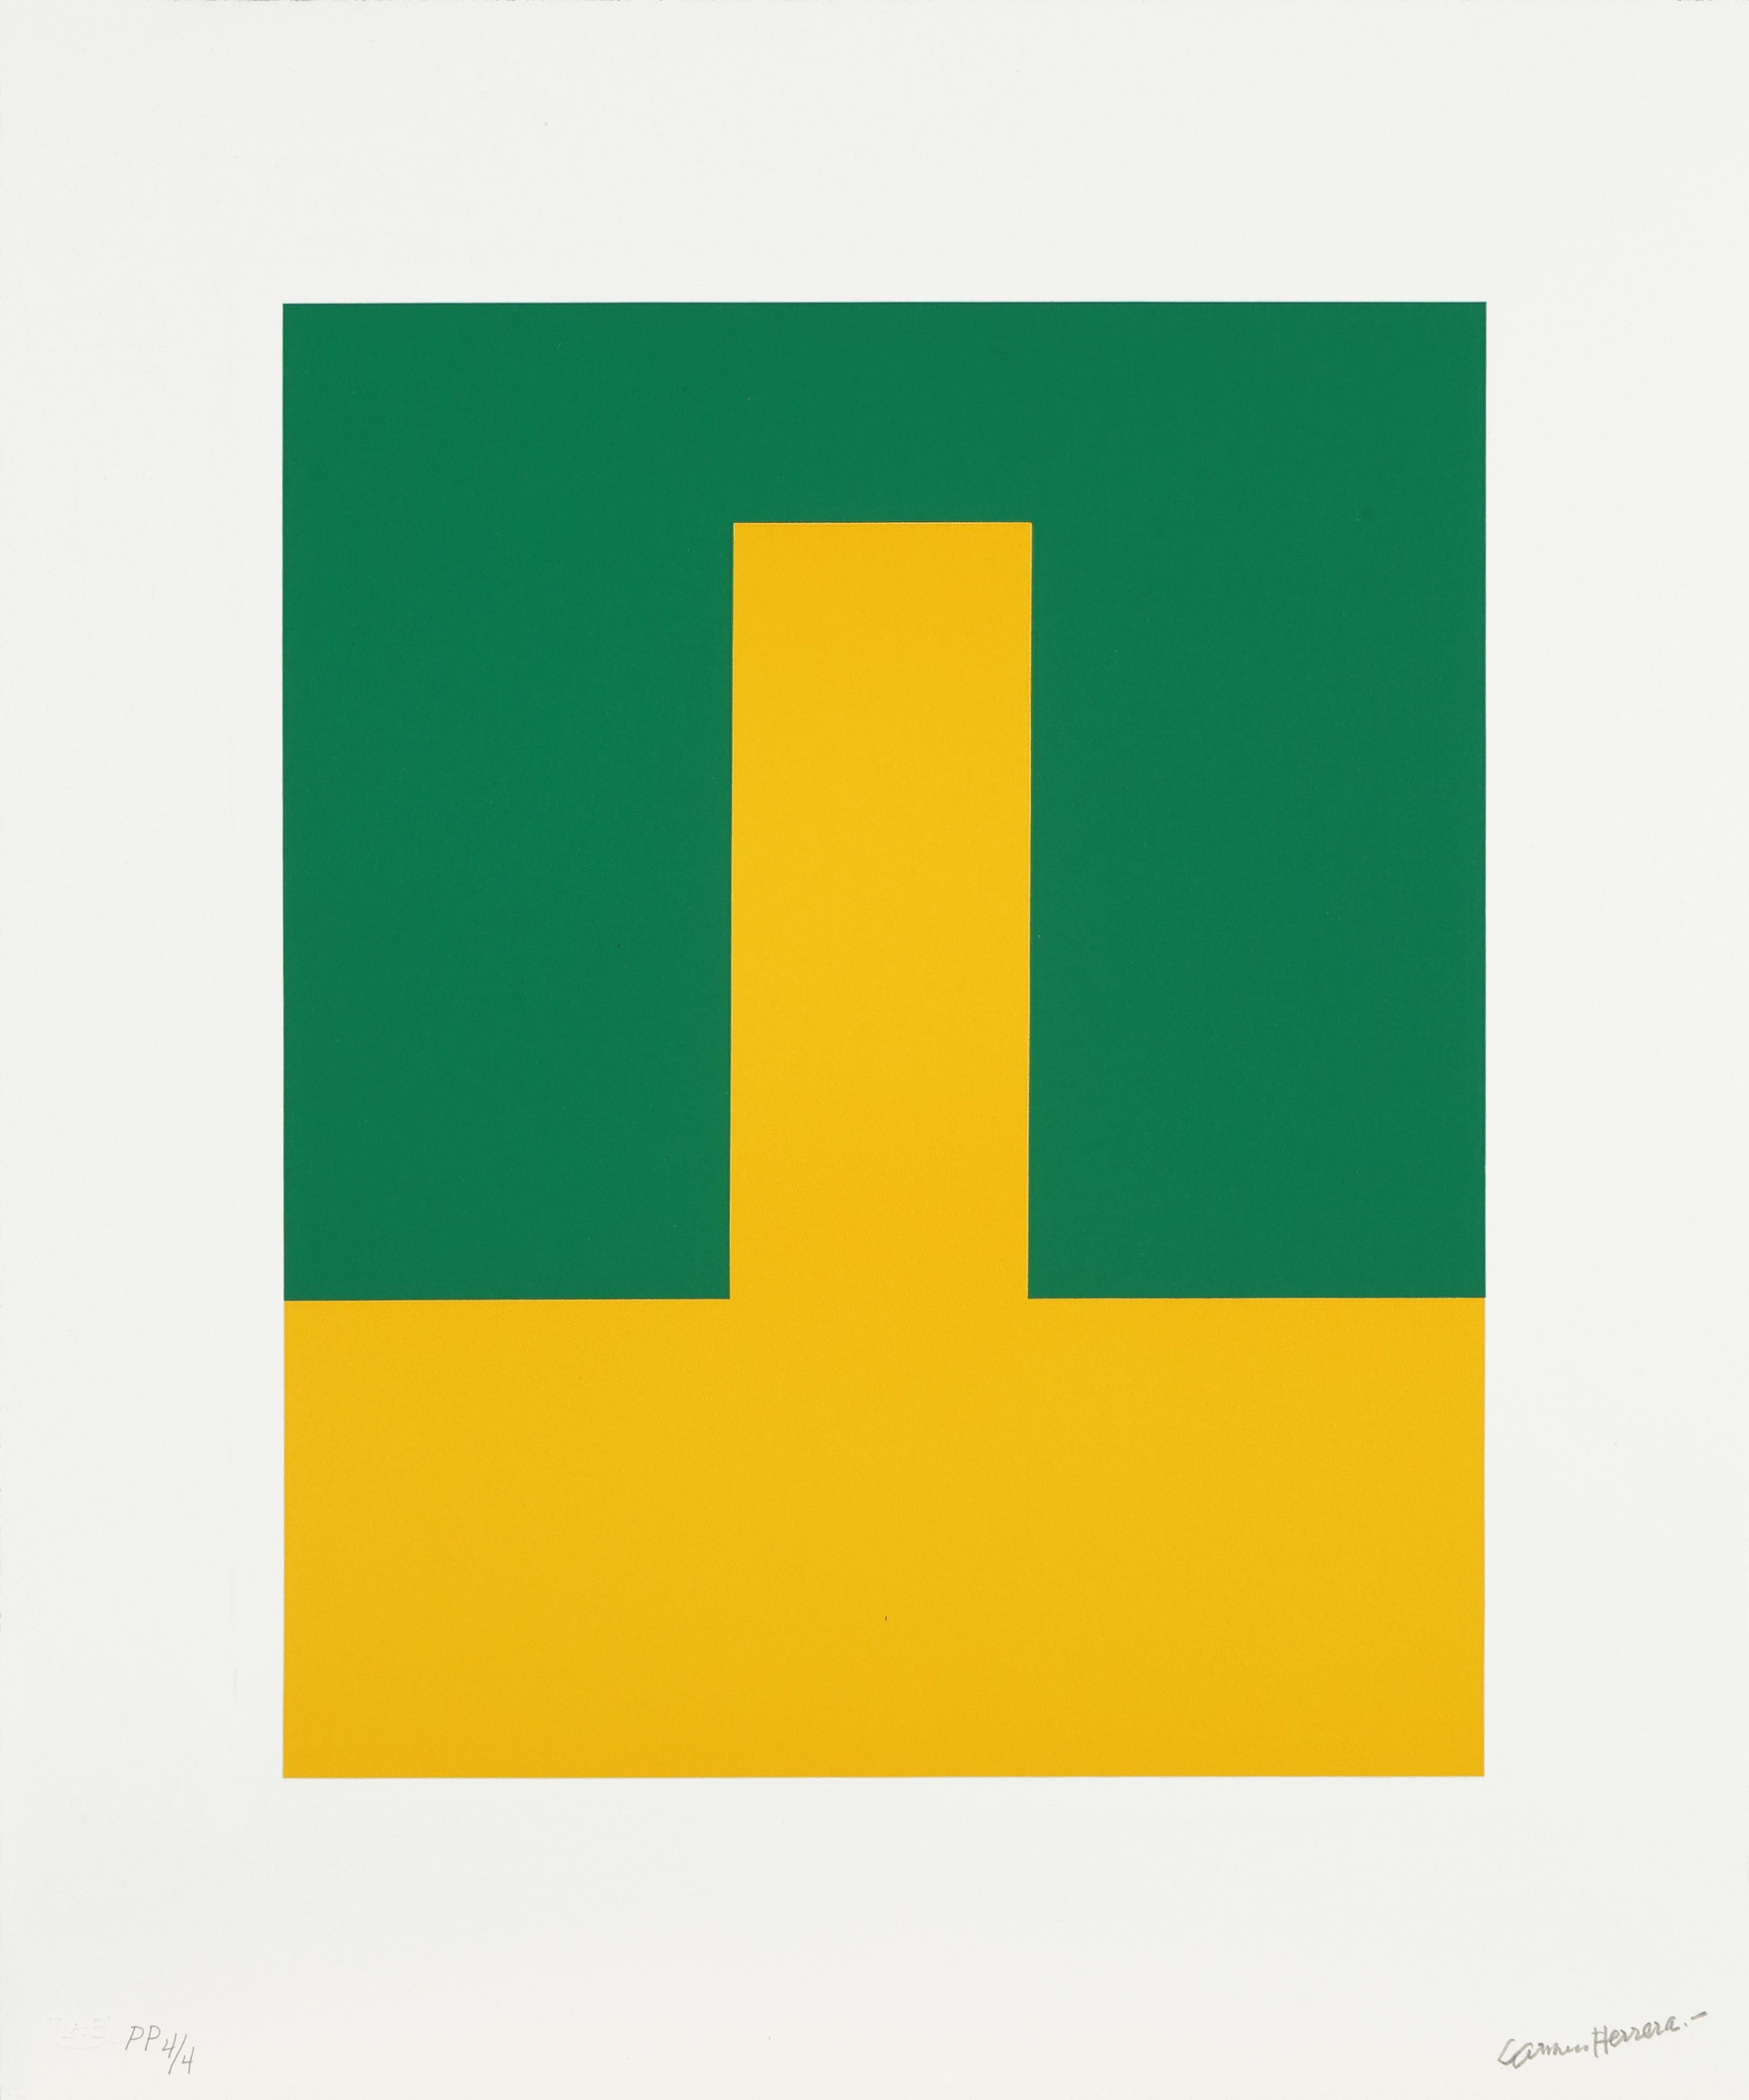 Verde y Amarillo (Green and Yellow). Folder of 3 lithographs. Edition 4 of 4 - Print by Carmen Herrera